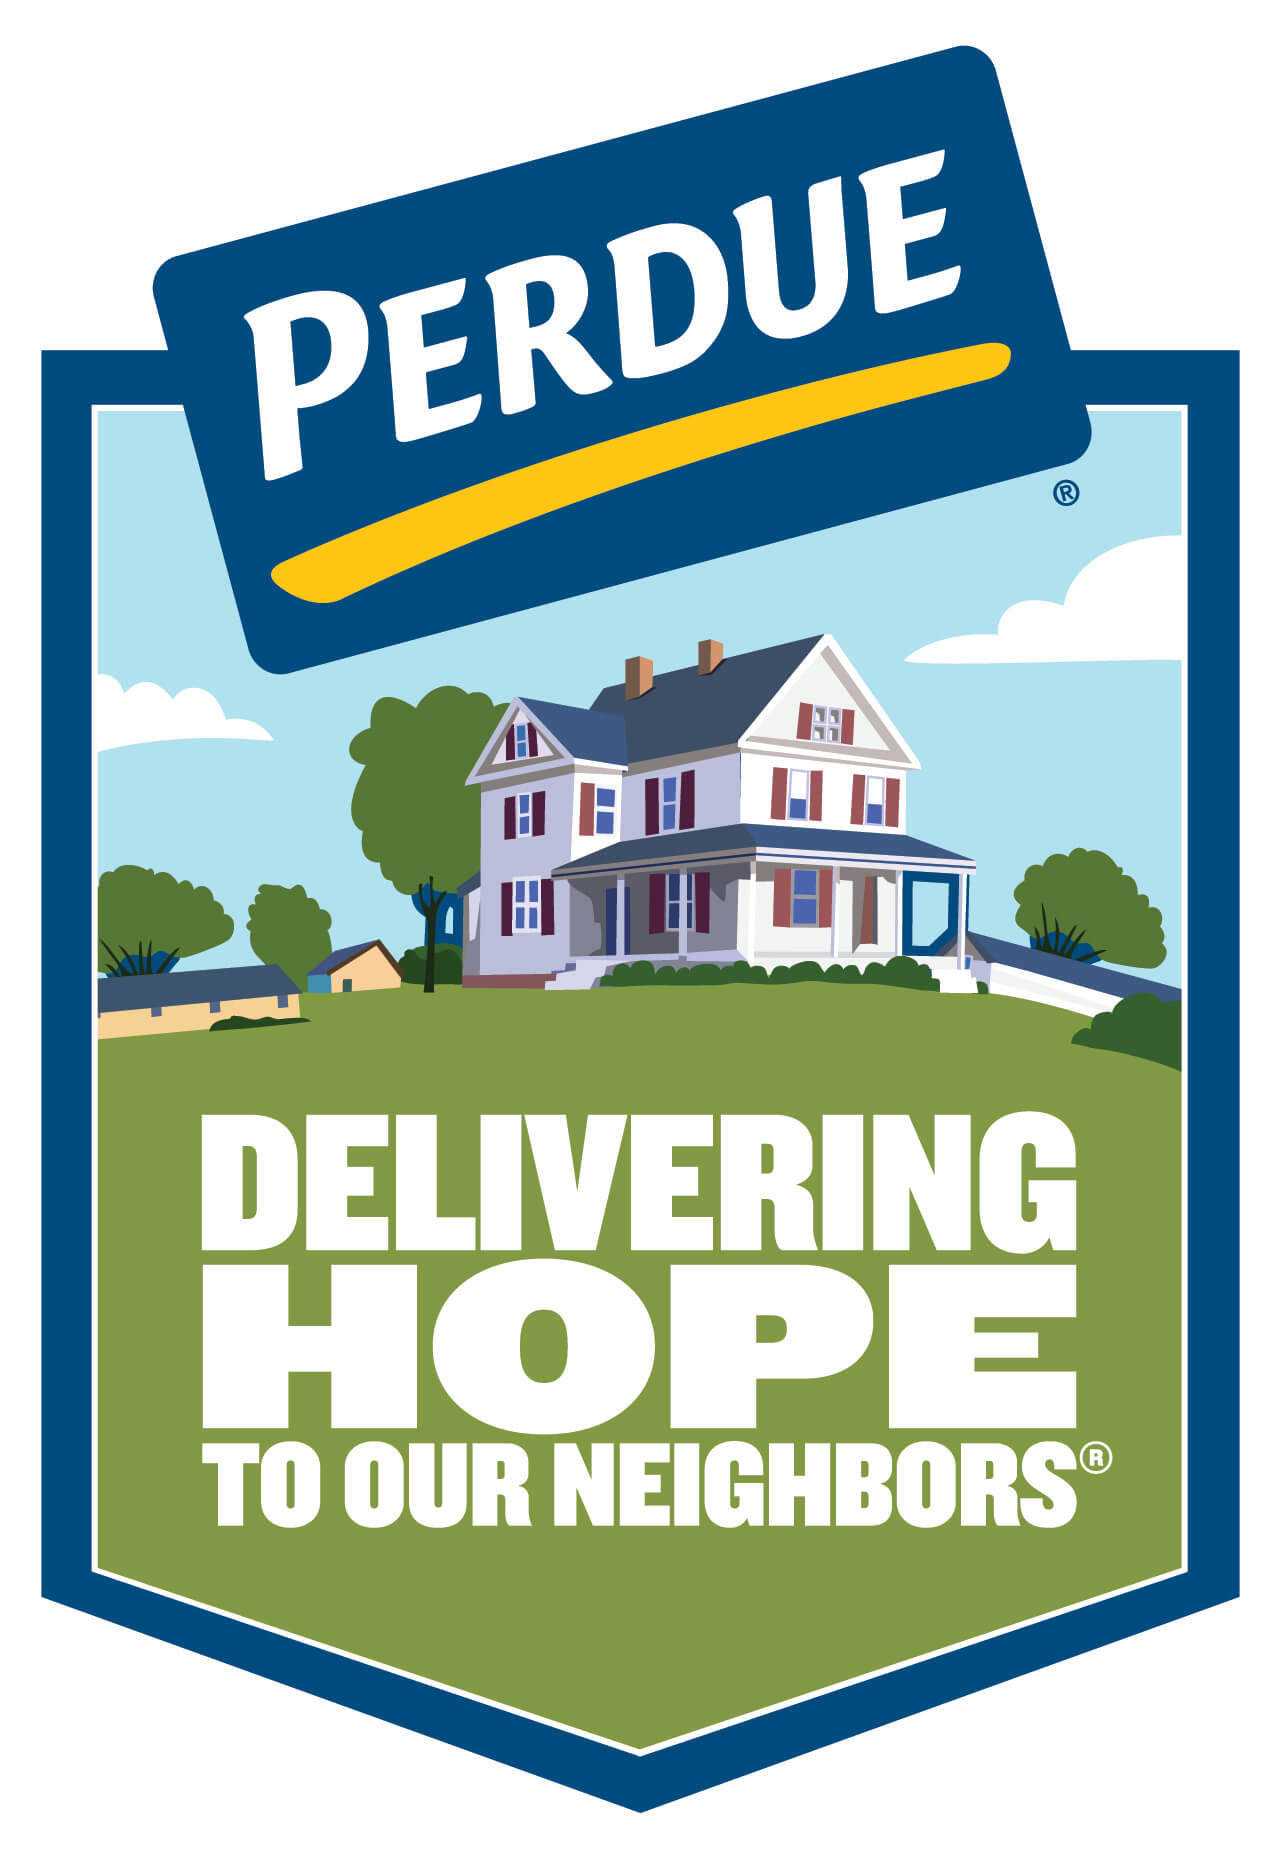 Perdue: Delivering hope to our neighbors